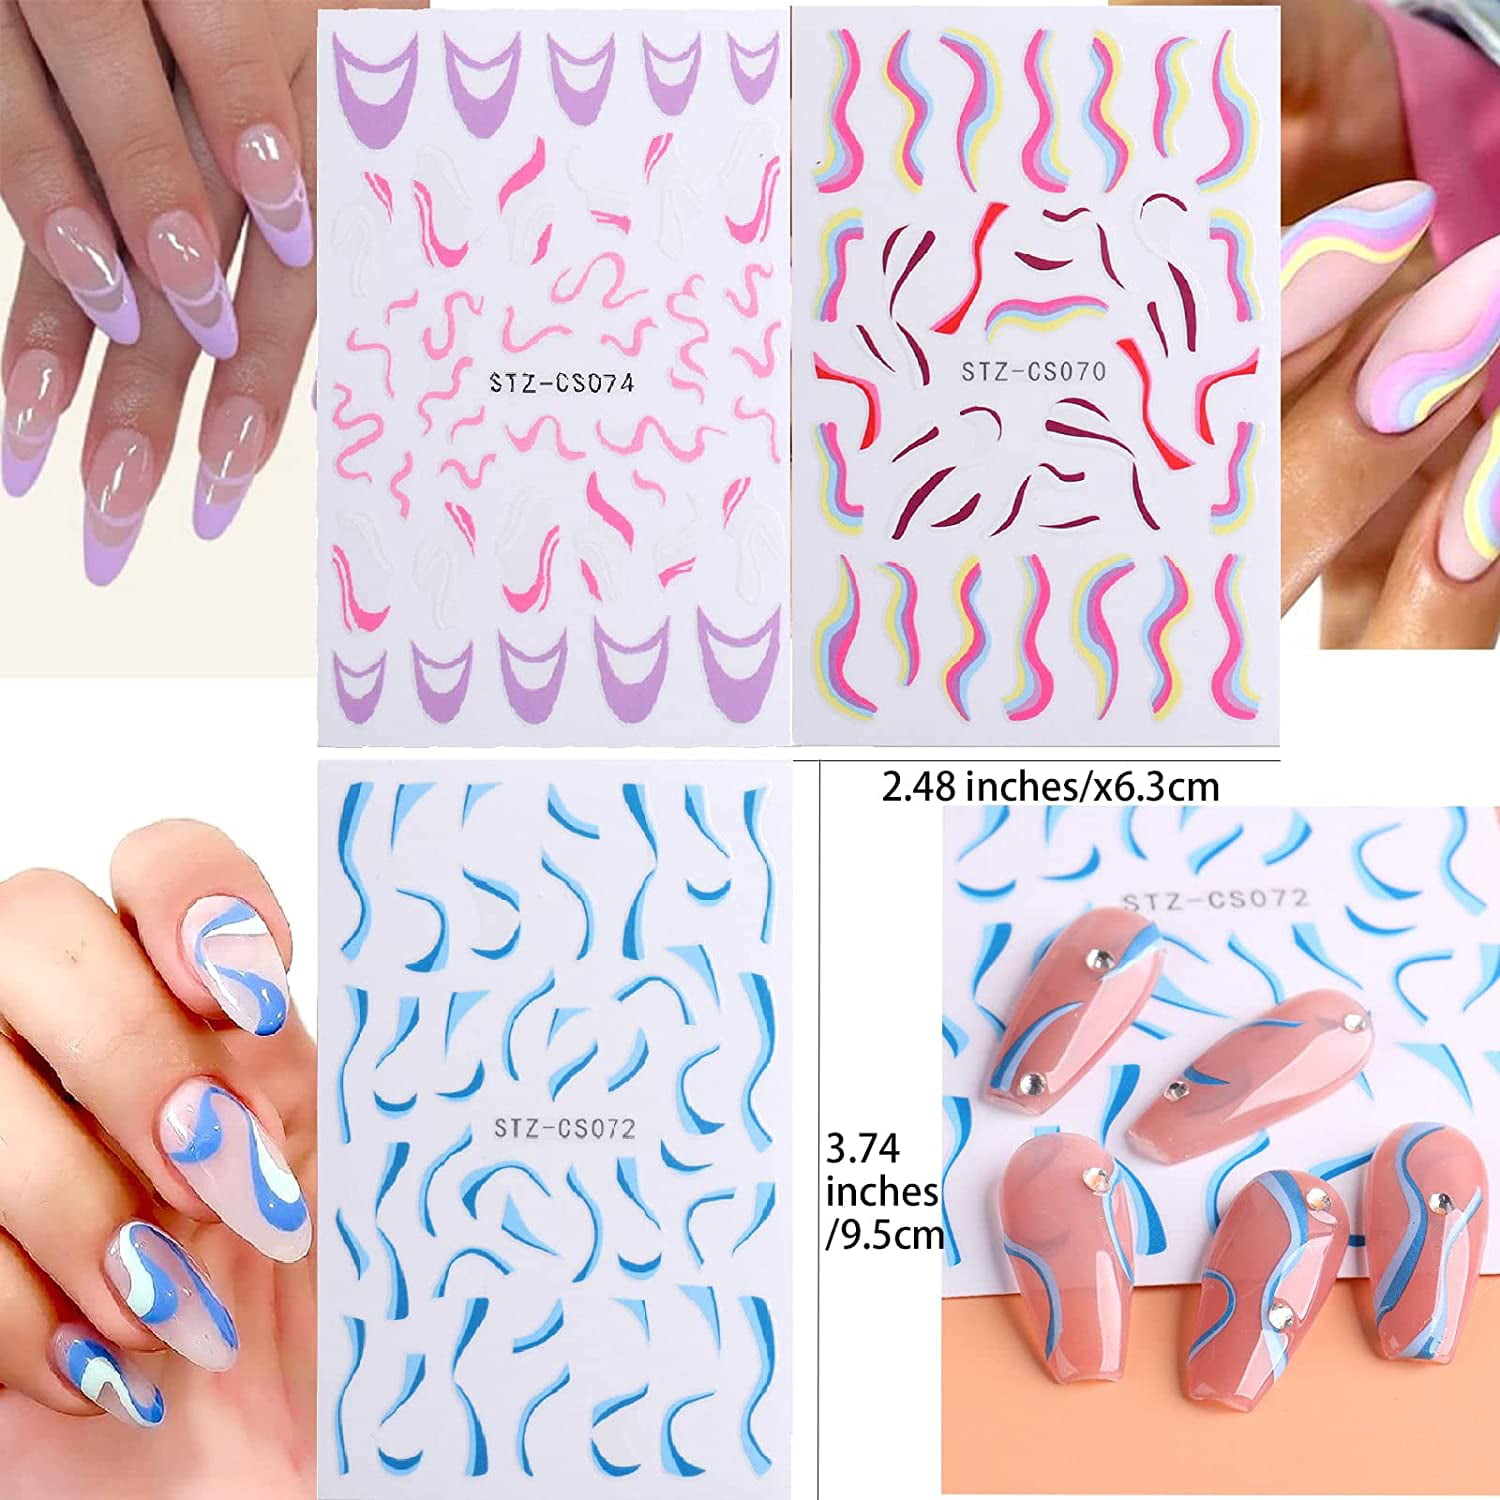 French Swirl Nail Art Stickers Decals Nail Art Supplies French Swirl Lines  Geometry Irregular Whirling Wave Cow Print Decal on Nails Art Charms